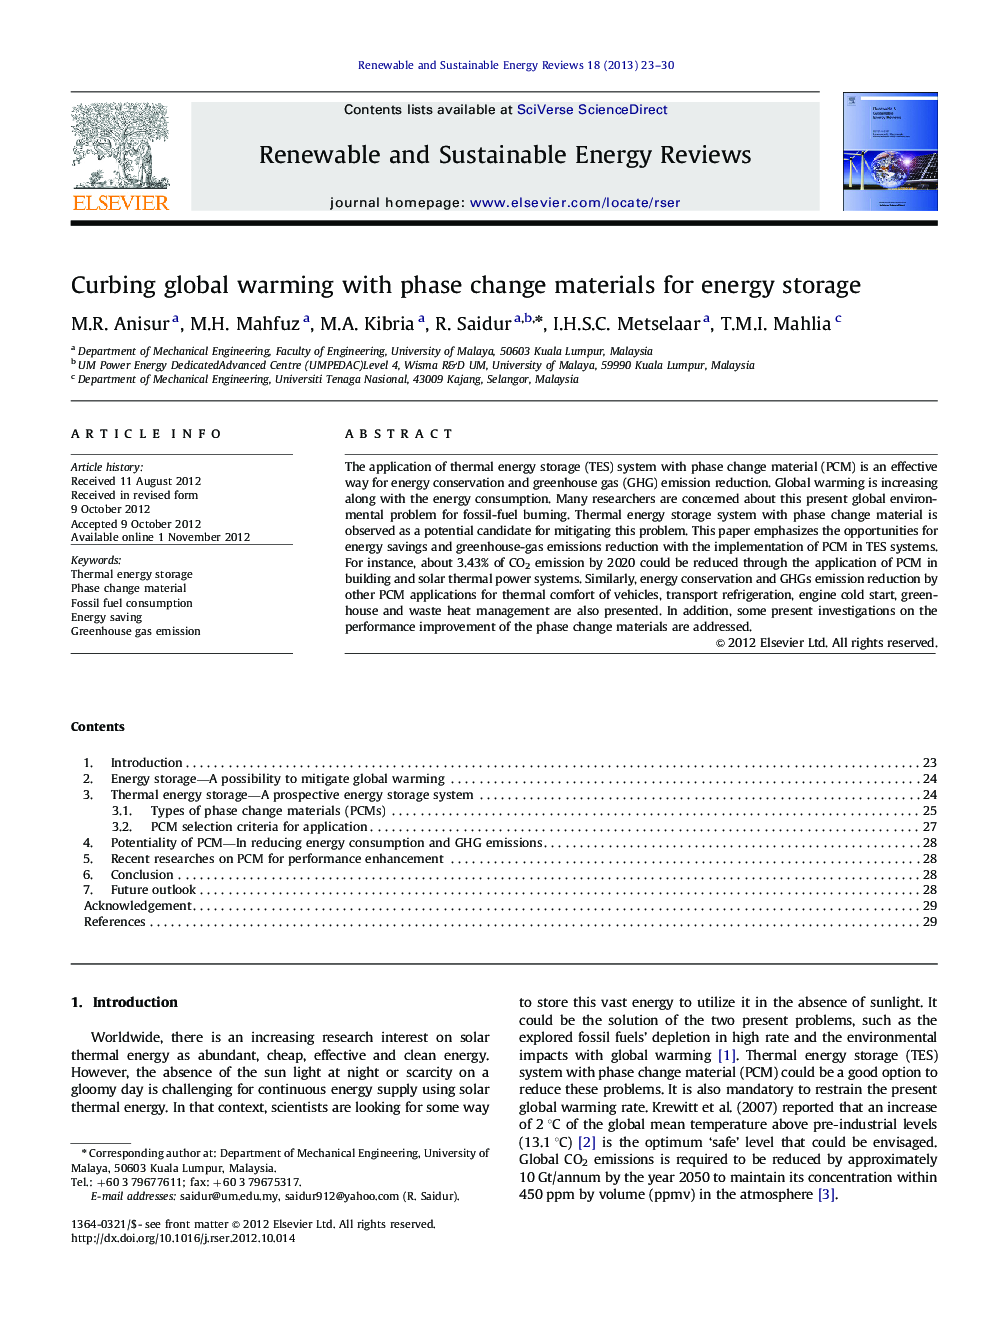 Curbing global warming with phase change materials for energy storage